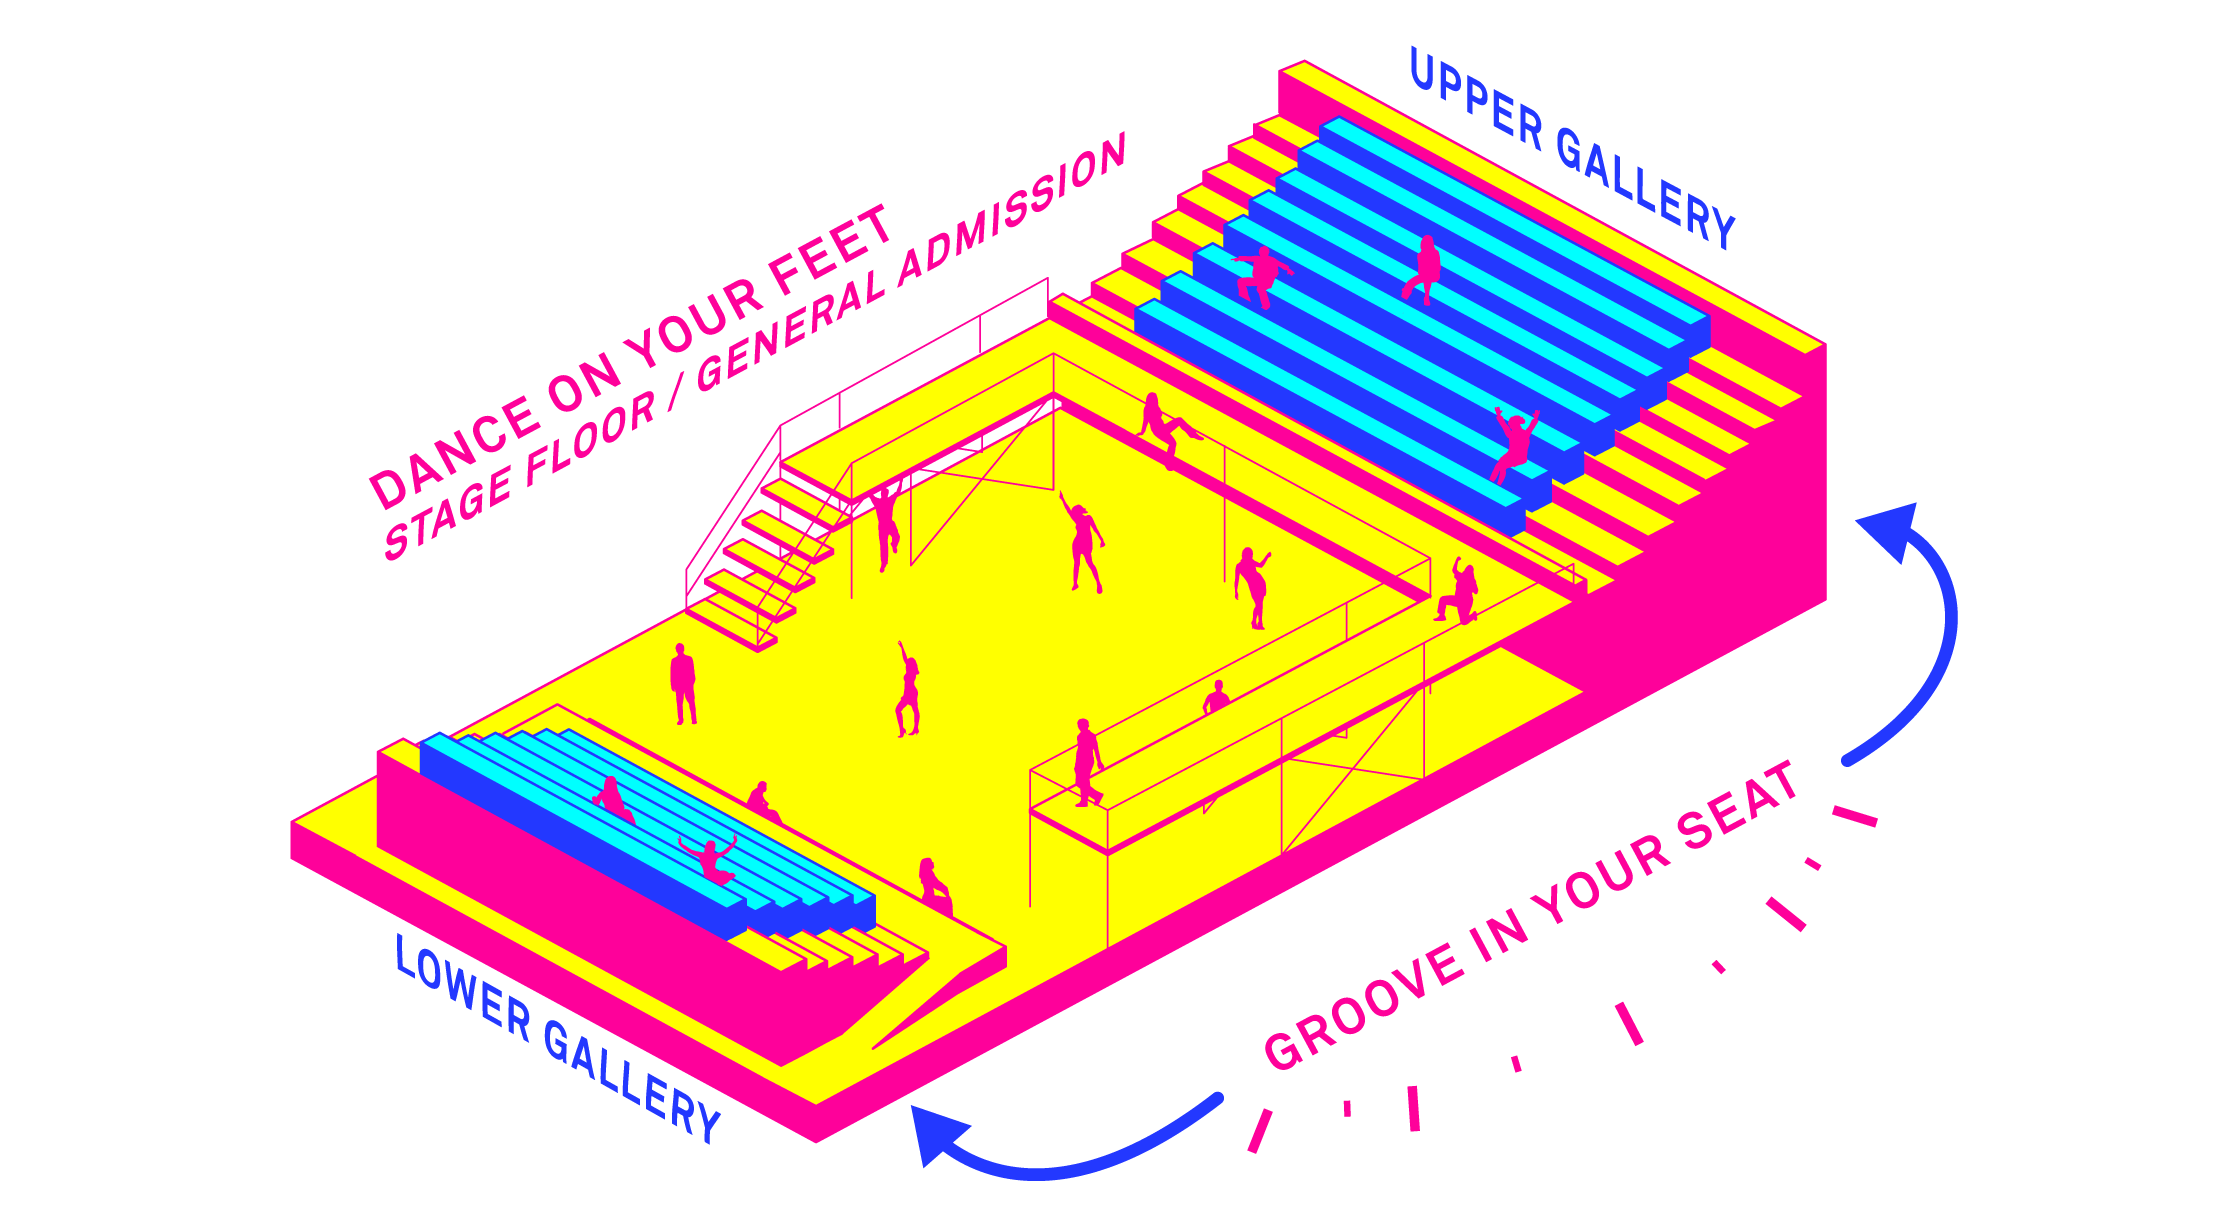 The Pasadena Playhouse's layout for its production of "Head Over Heels."